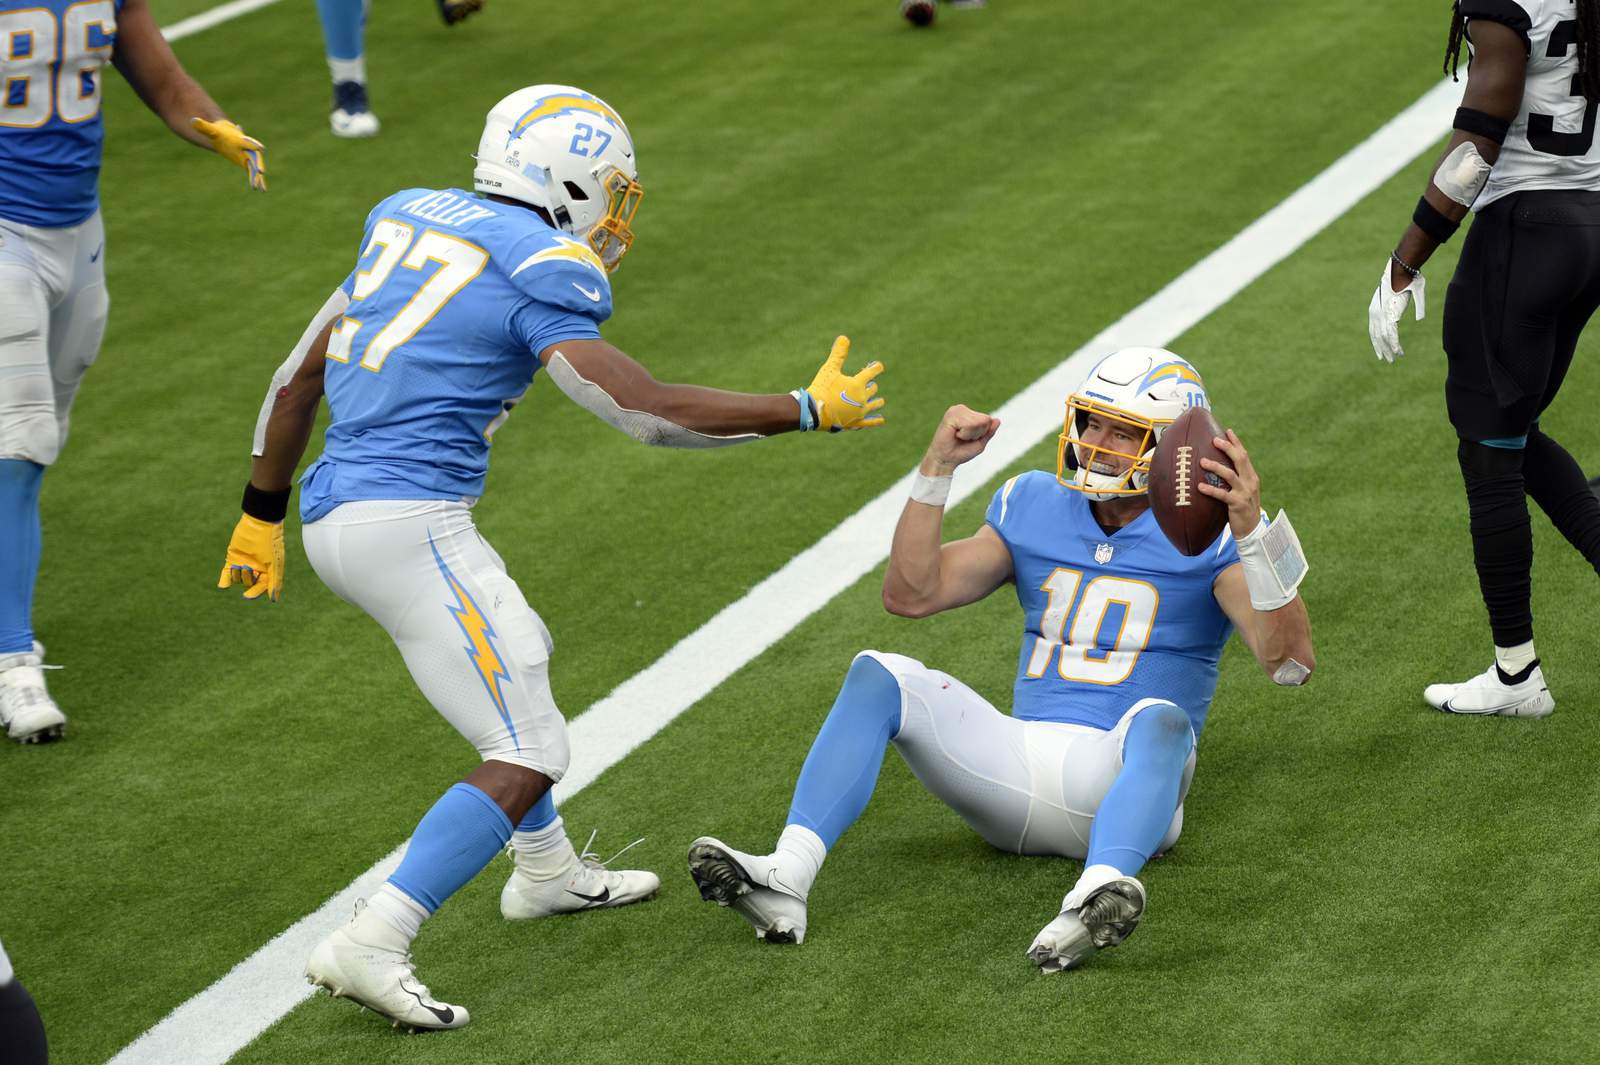 Herbert leads Chargers to 39-29 victory over Jaguars